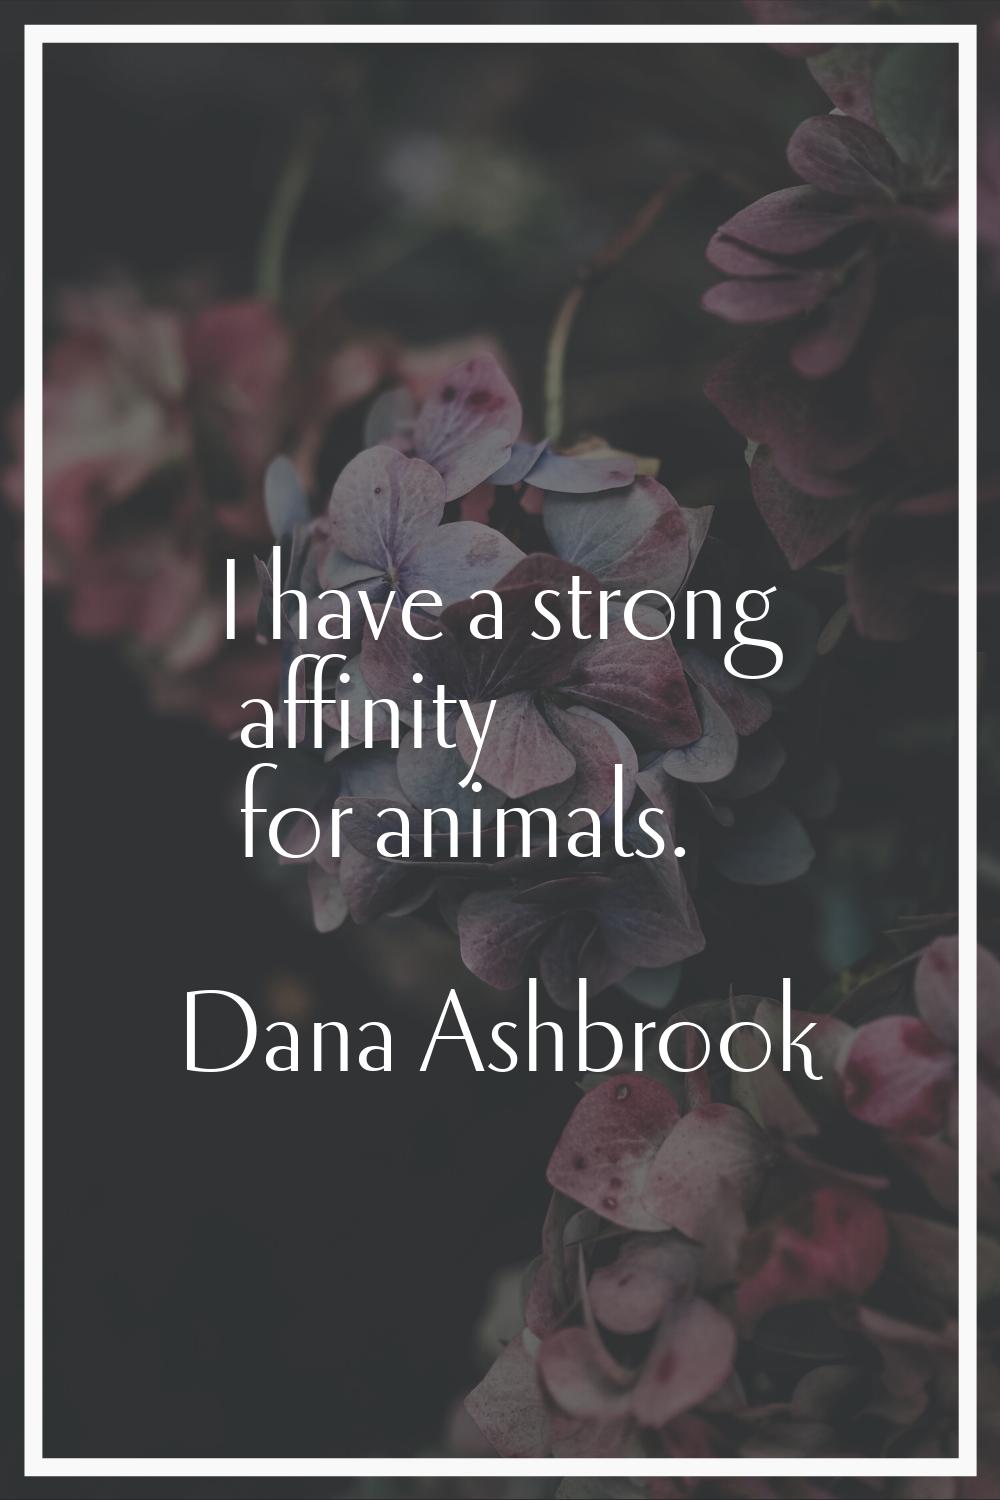 I have a strong affinity for animals.